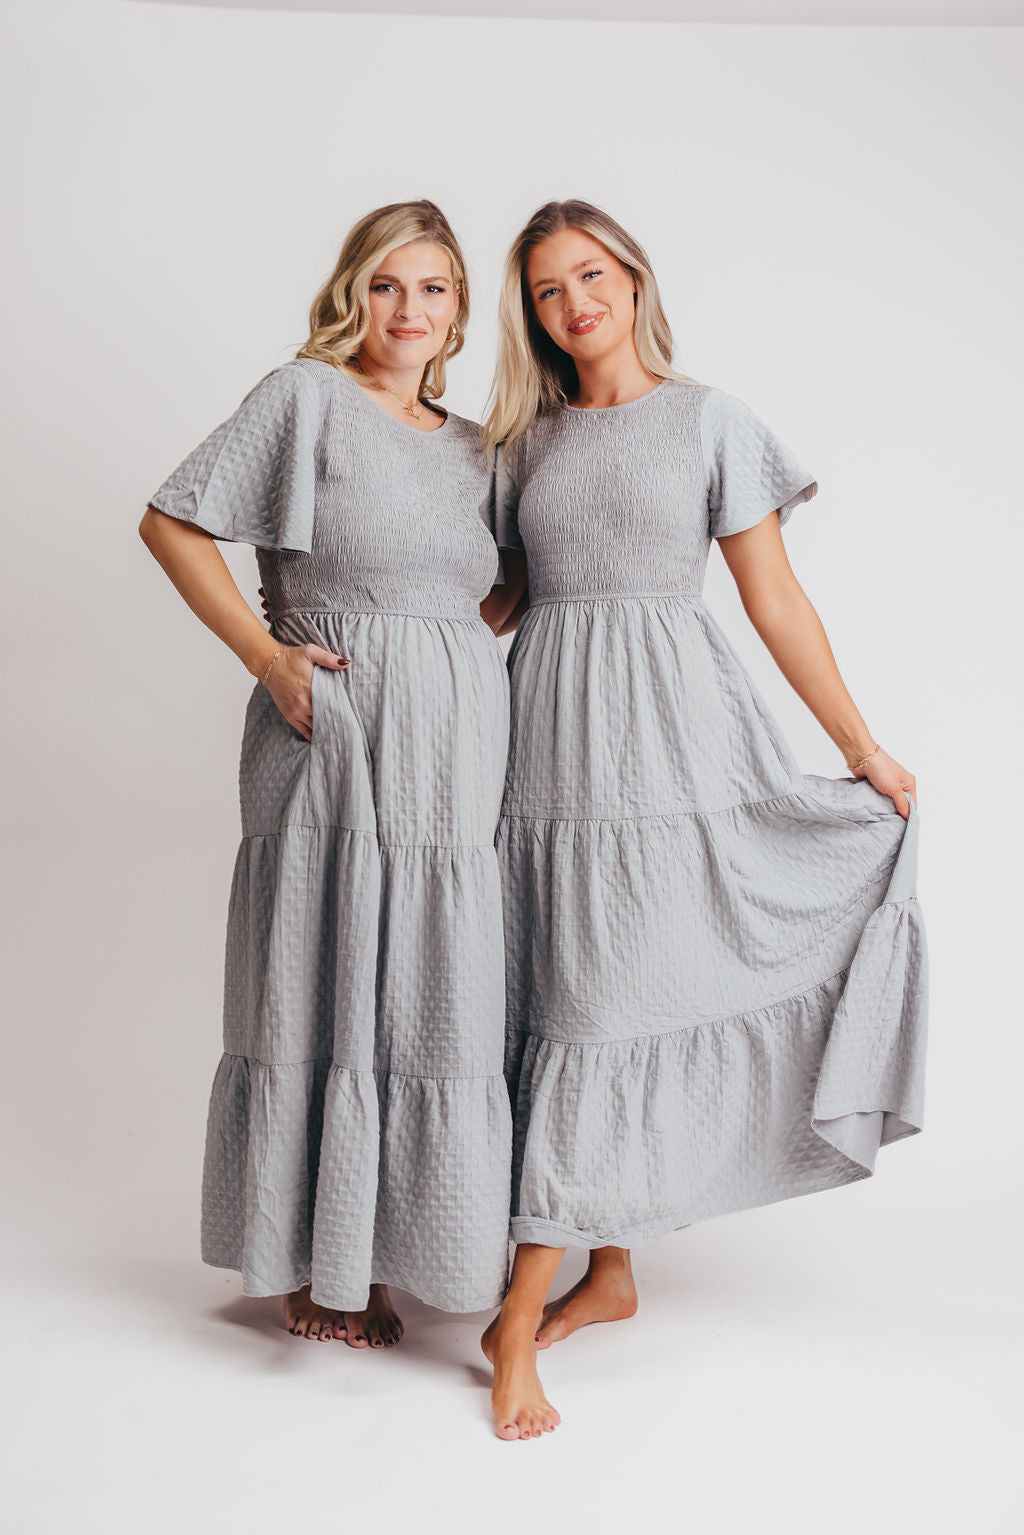 Coda Smocked Tiered Maxi Dress in Blue Grey - Bump Friendly and Inclusive Sizing